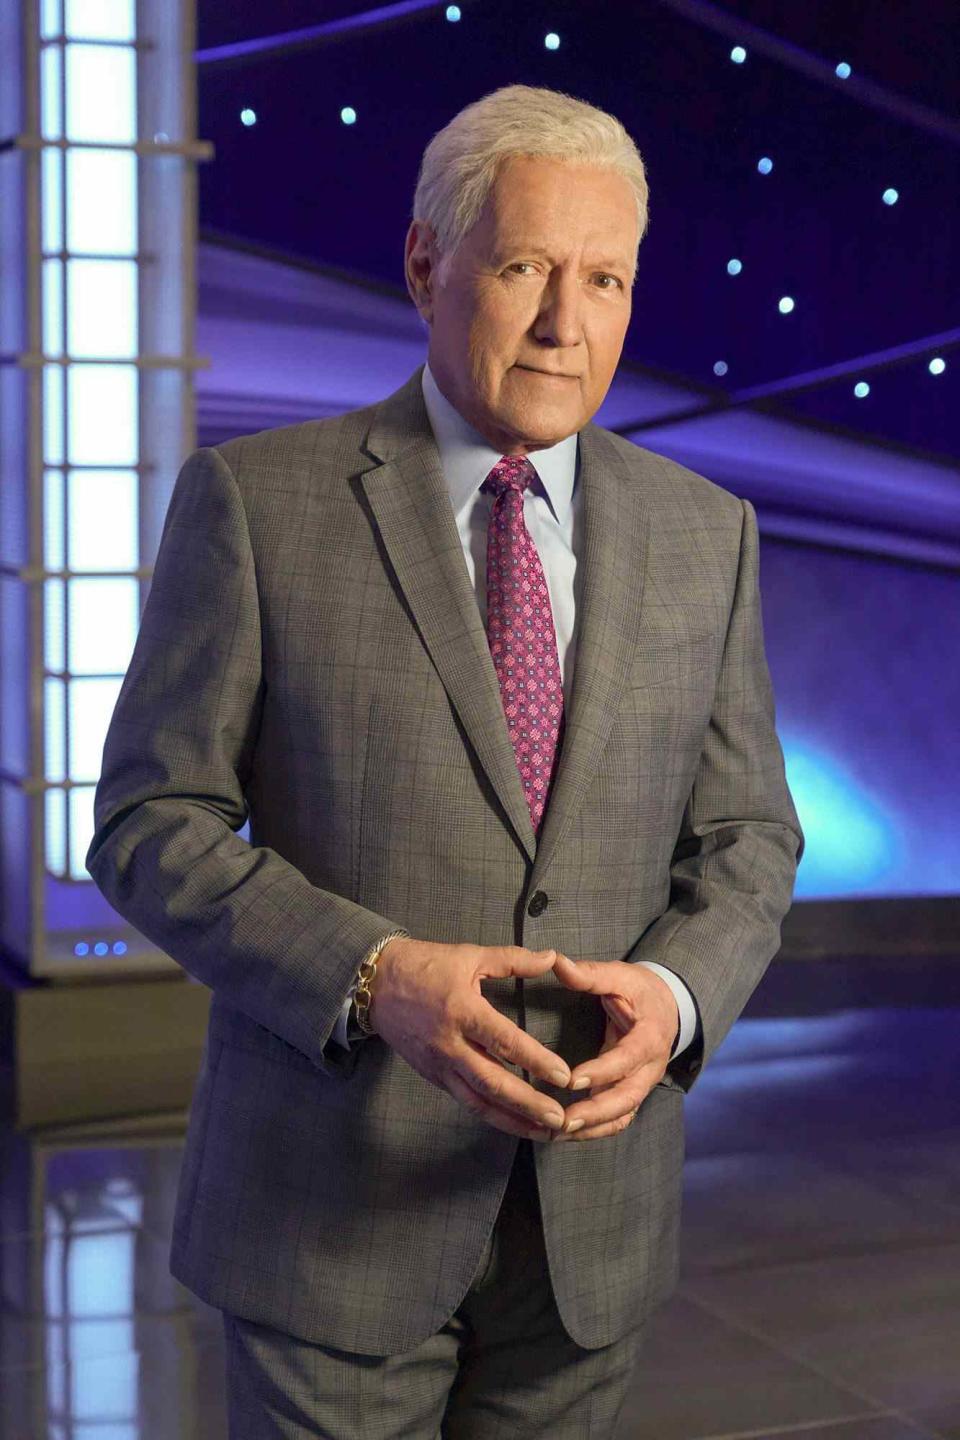 Remembering Alex Trebek's Life and Career in Photos: From Local Canadian TV to Jeopardy!